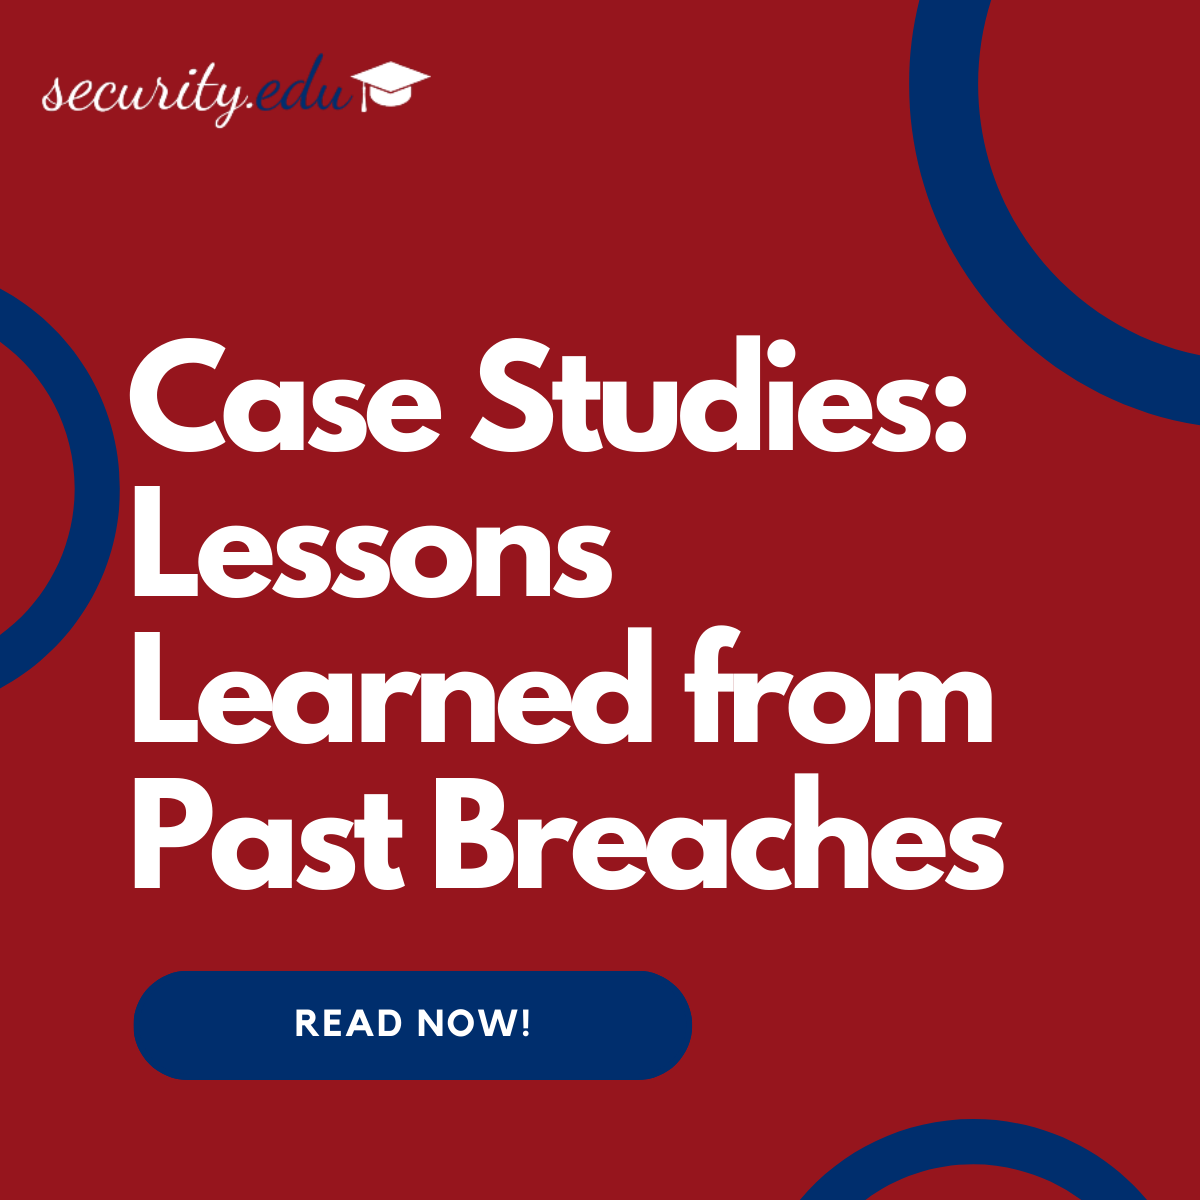 Featured image for “Case Studies: Lessons Learned from Security Breaches”